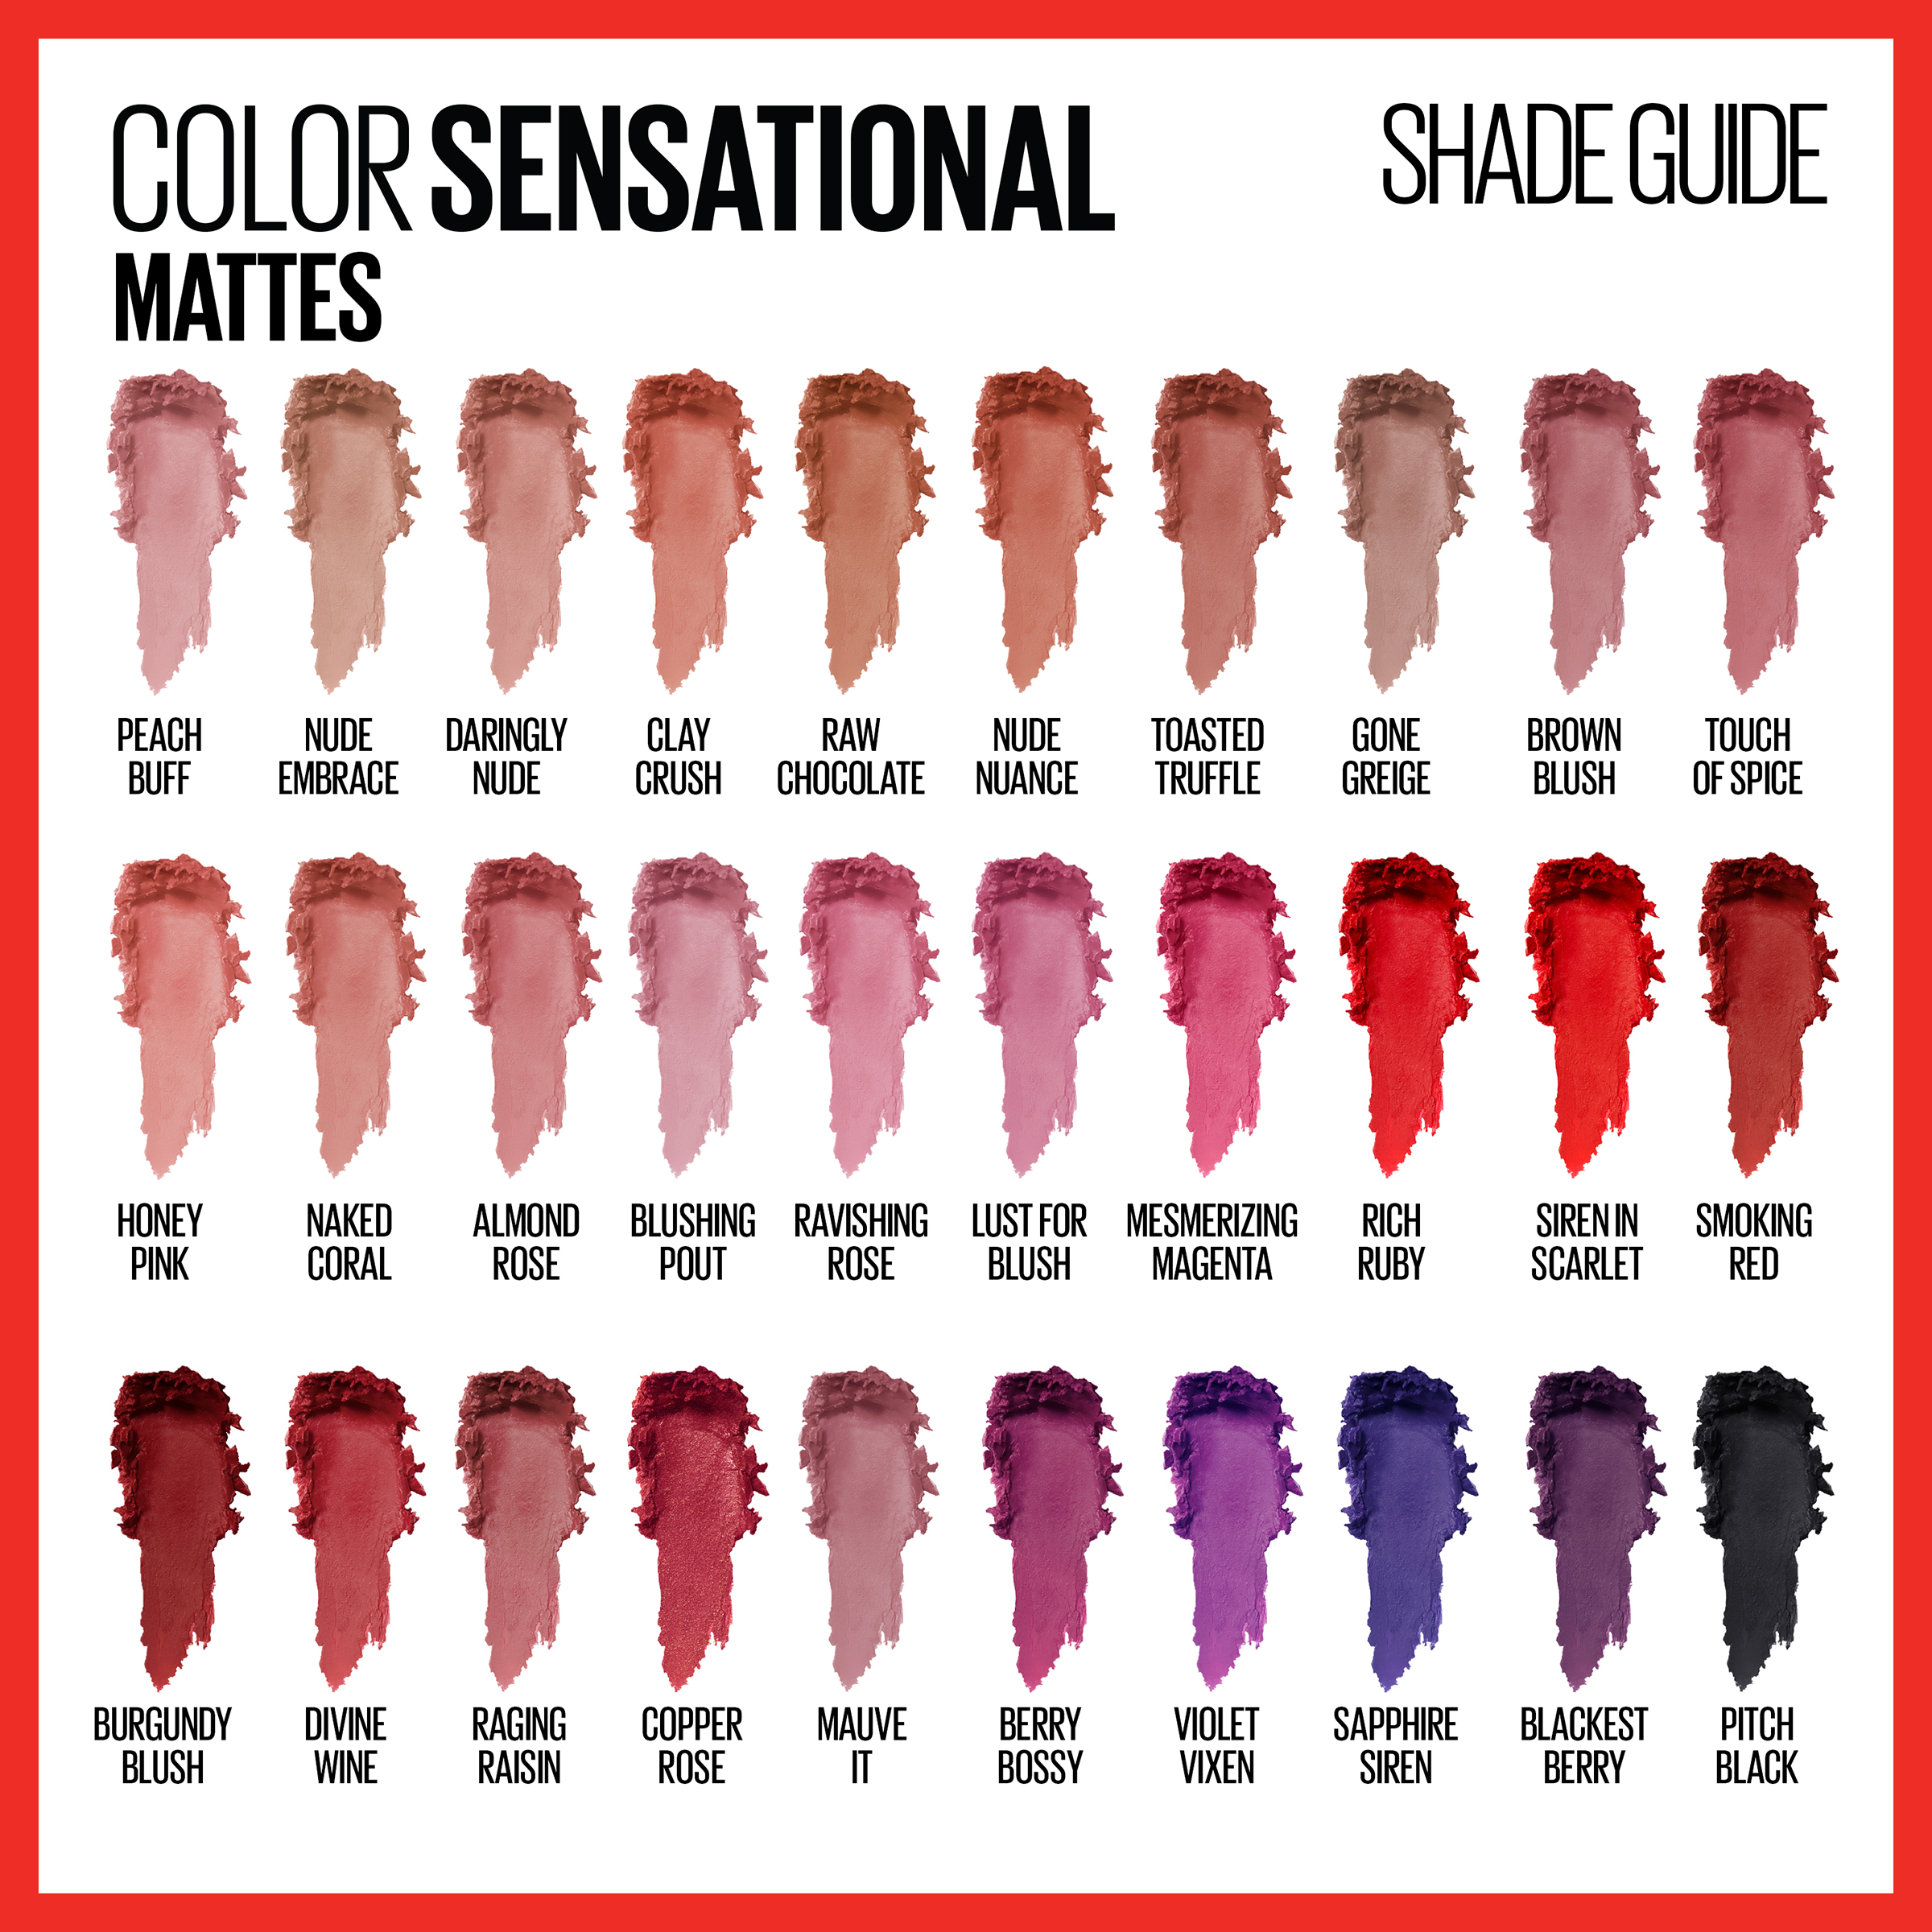 Maybelline Color Sensational Matte Finish Lipstick, Touch Of Spice - image 4 of 9